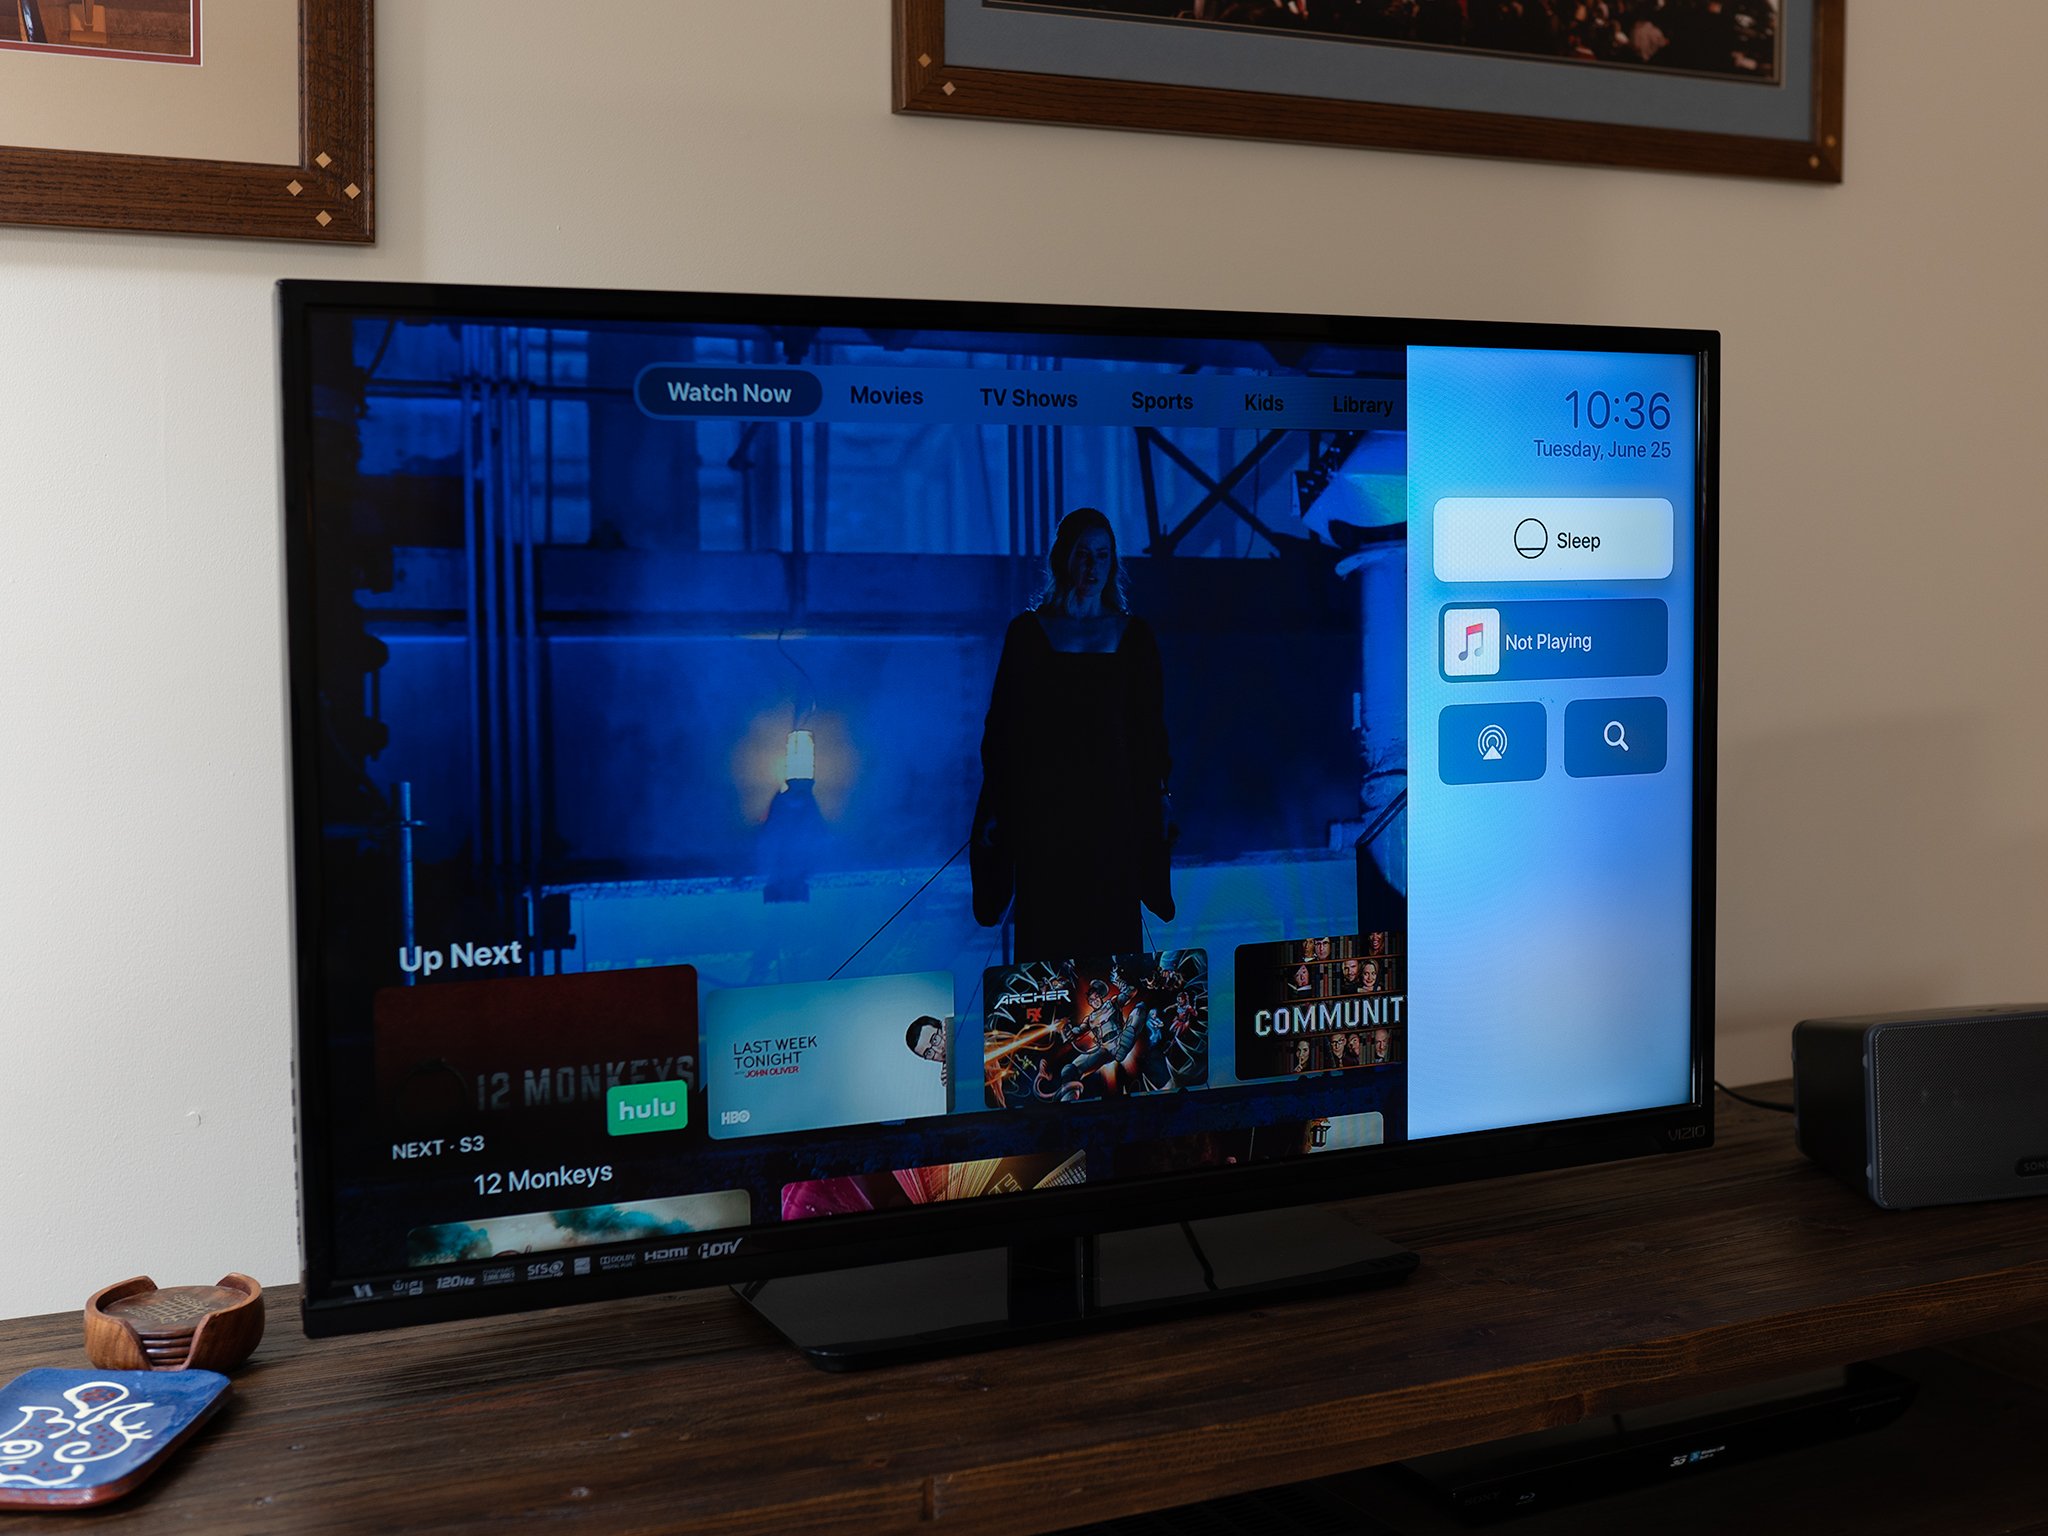 How to use Control Center on Apple TV